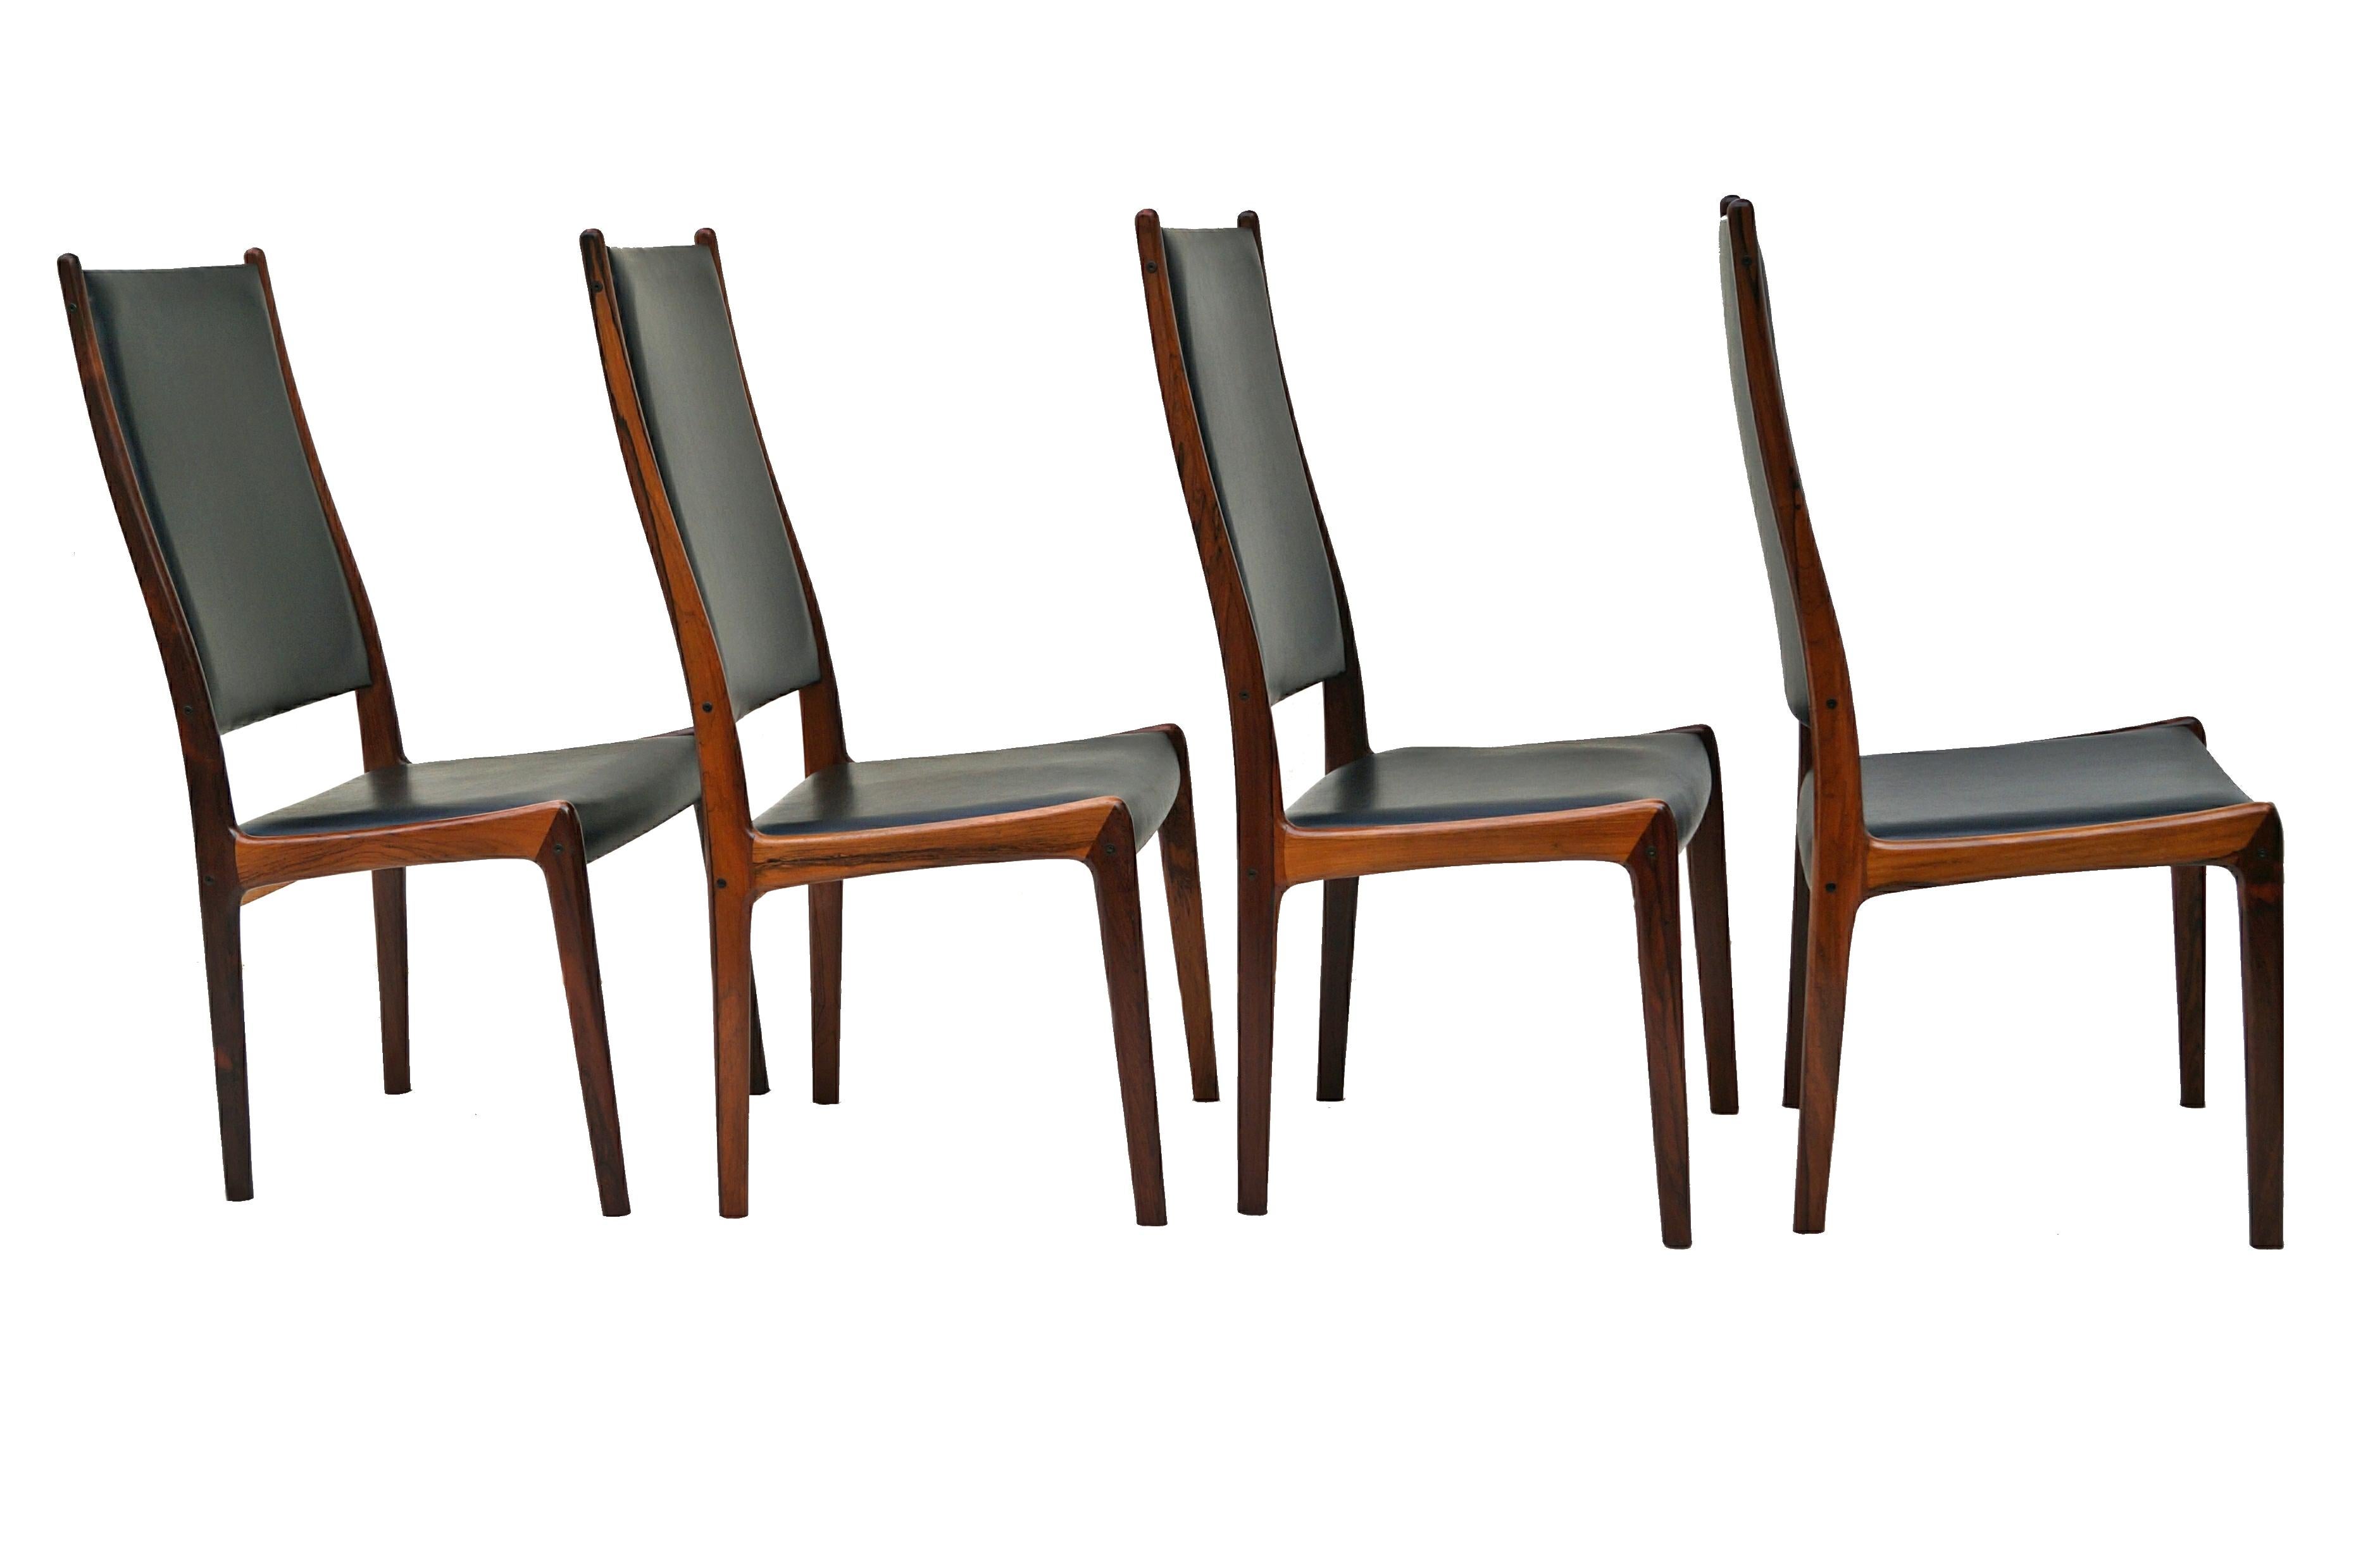 Set of 6 Johannes Andersen dining chairs in rosewood by Mogens Kold in Denmark. 4 side chairs and 2 armchairs.
Armchairs measure 40 3/4